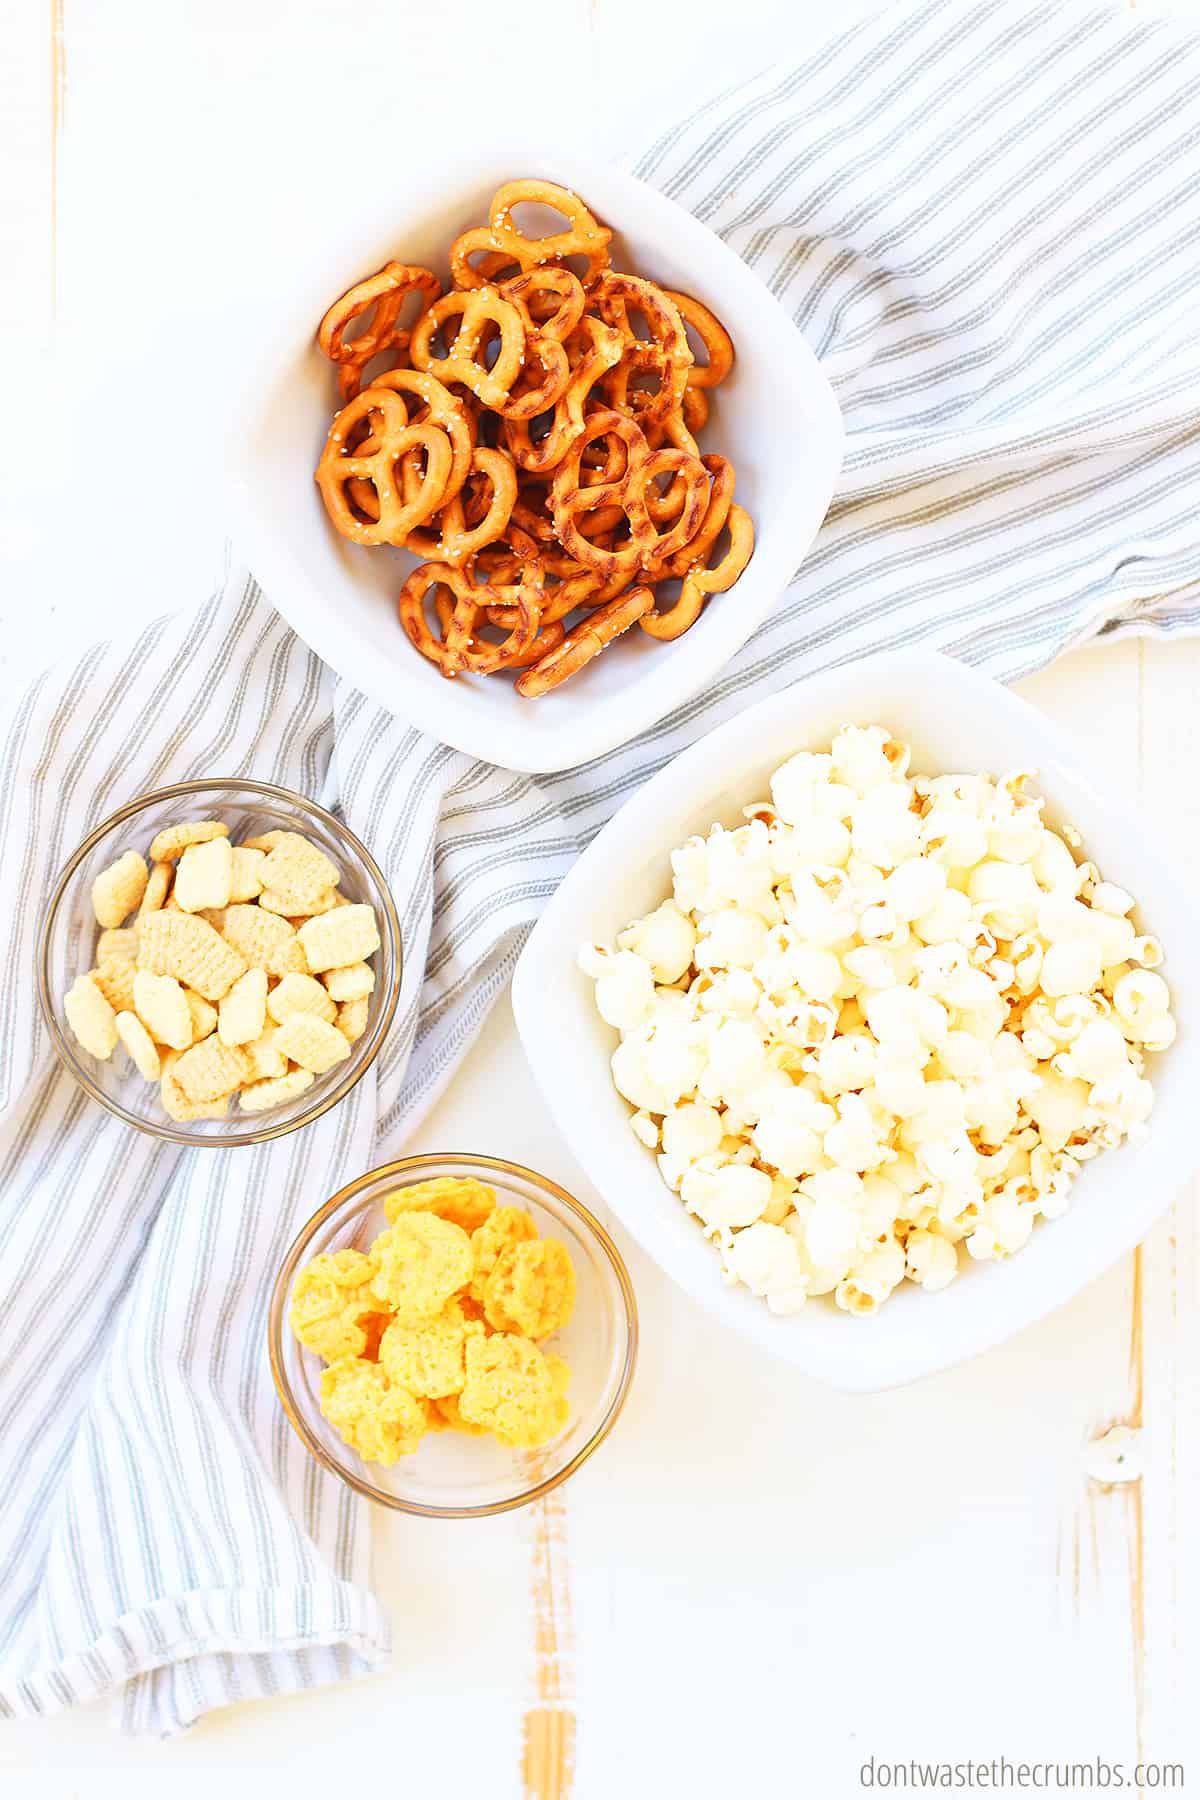 Dry snacks like pretzels, popcorn and crackers are all perfect snacks for road trips.